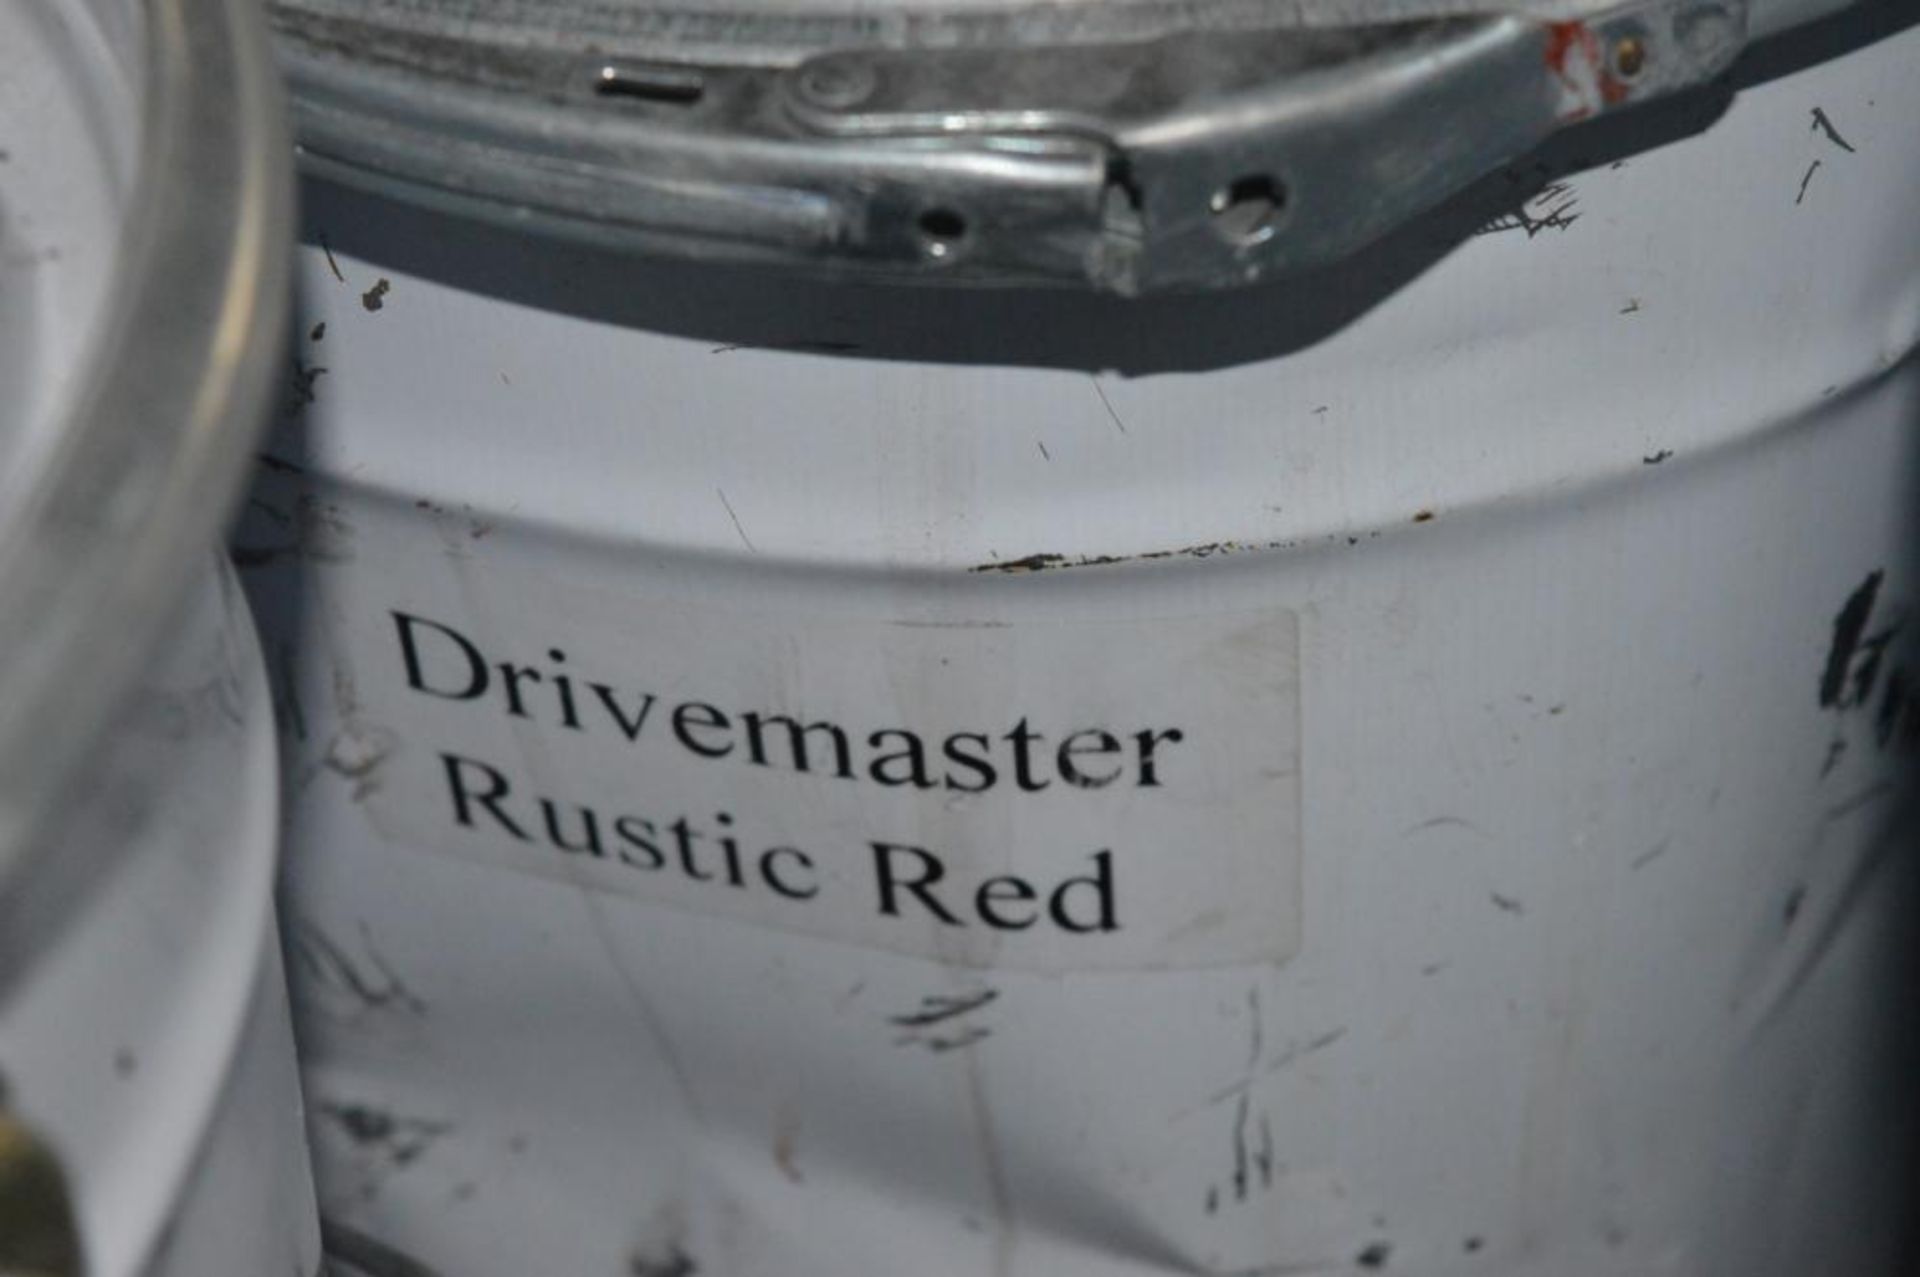 Approx. 24 x 20 Litre Assorted Tins of Paint inc. Roof + Tile, Drivemaster + More - Ref: DRT0233 - C - Image 5 of 5